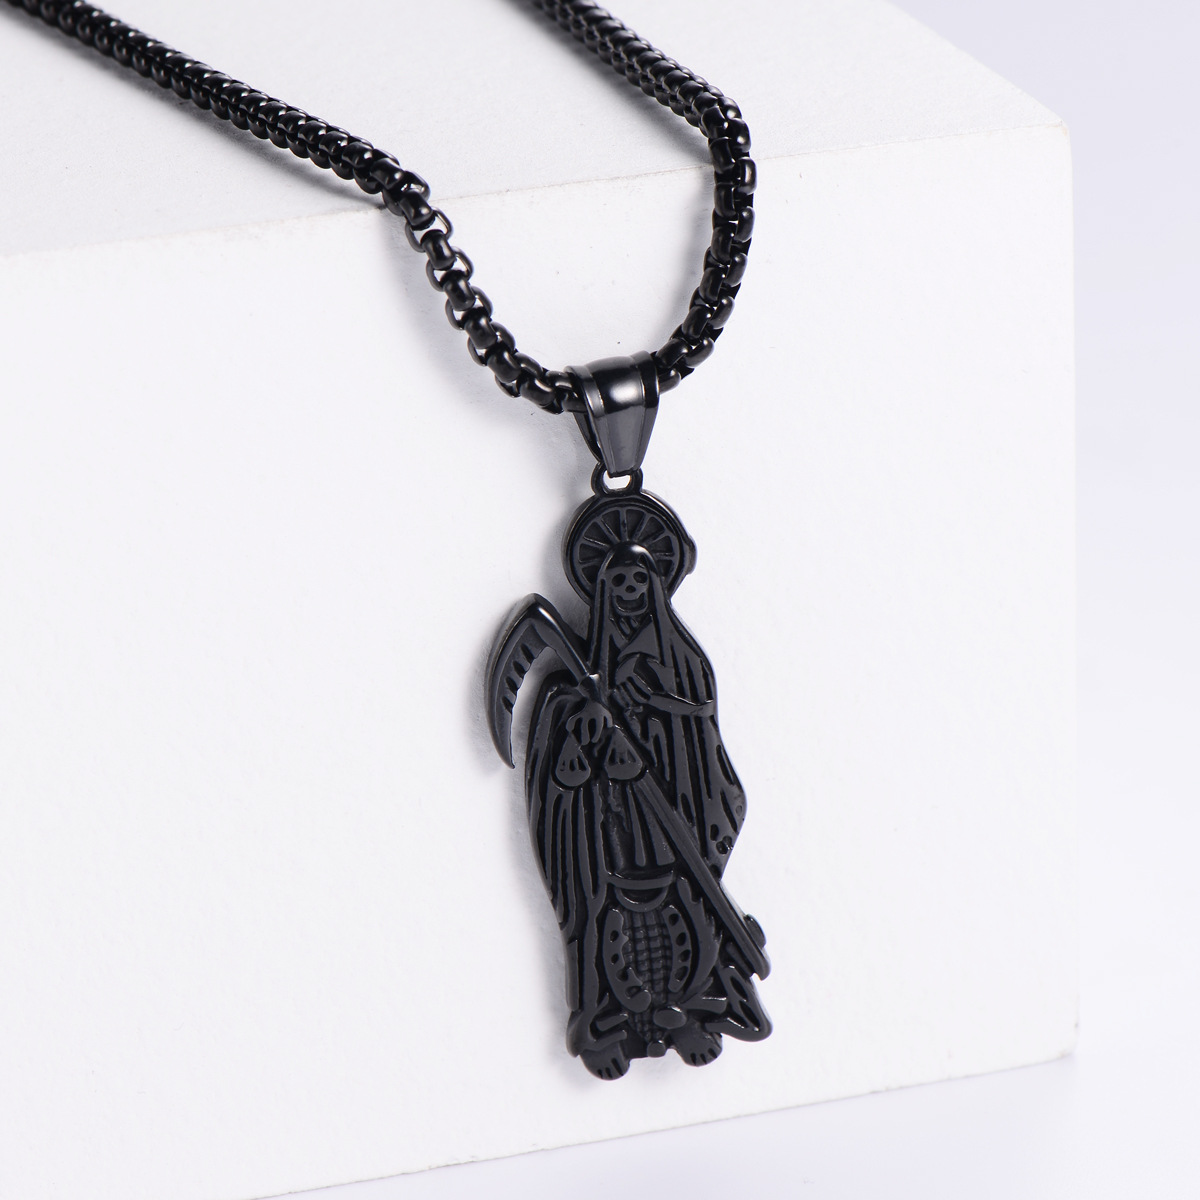 6:【Black】with chain pendant